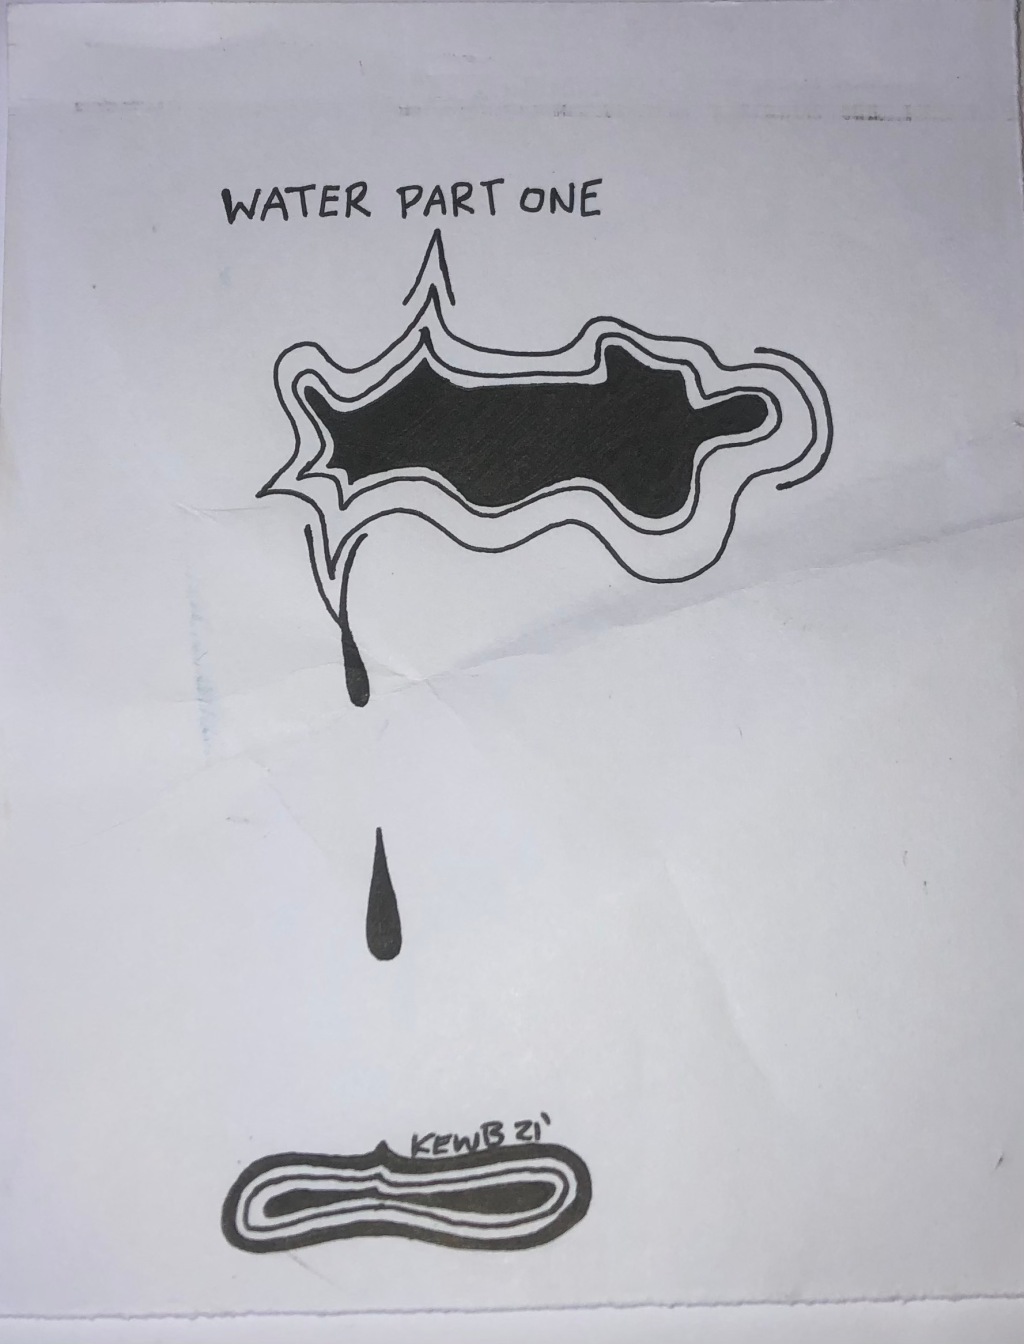 Water. A Poem: Part 1